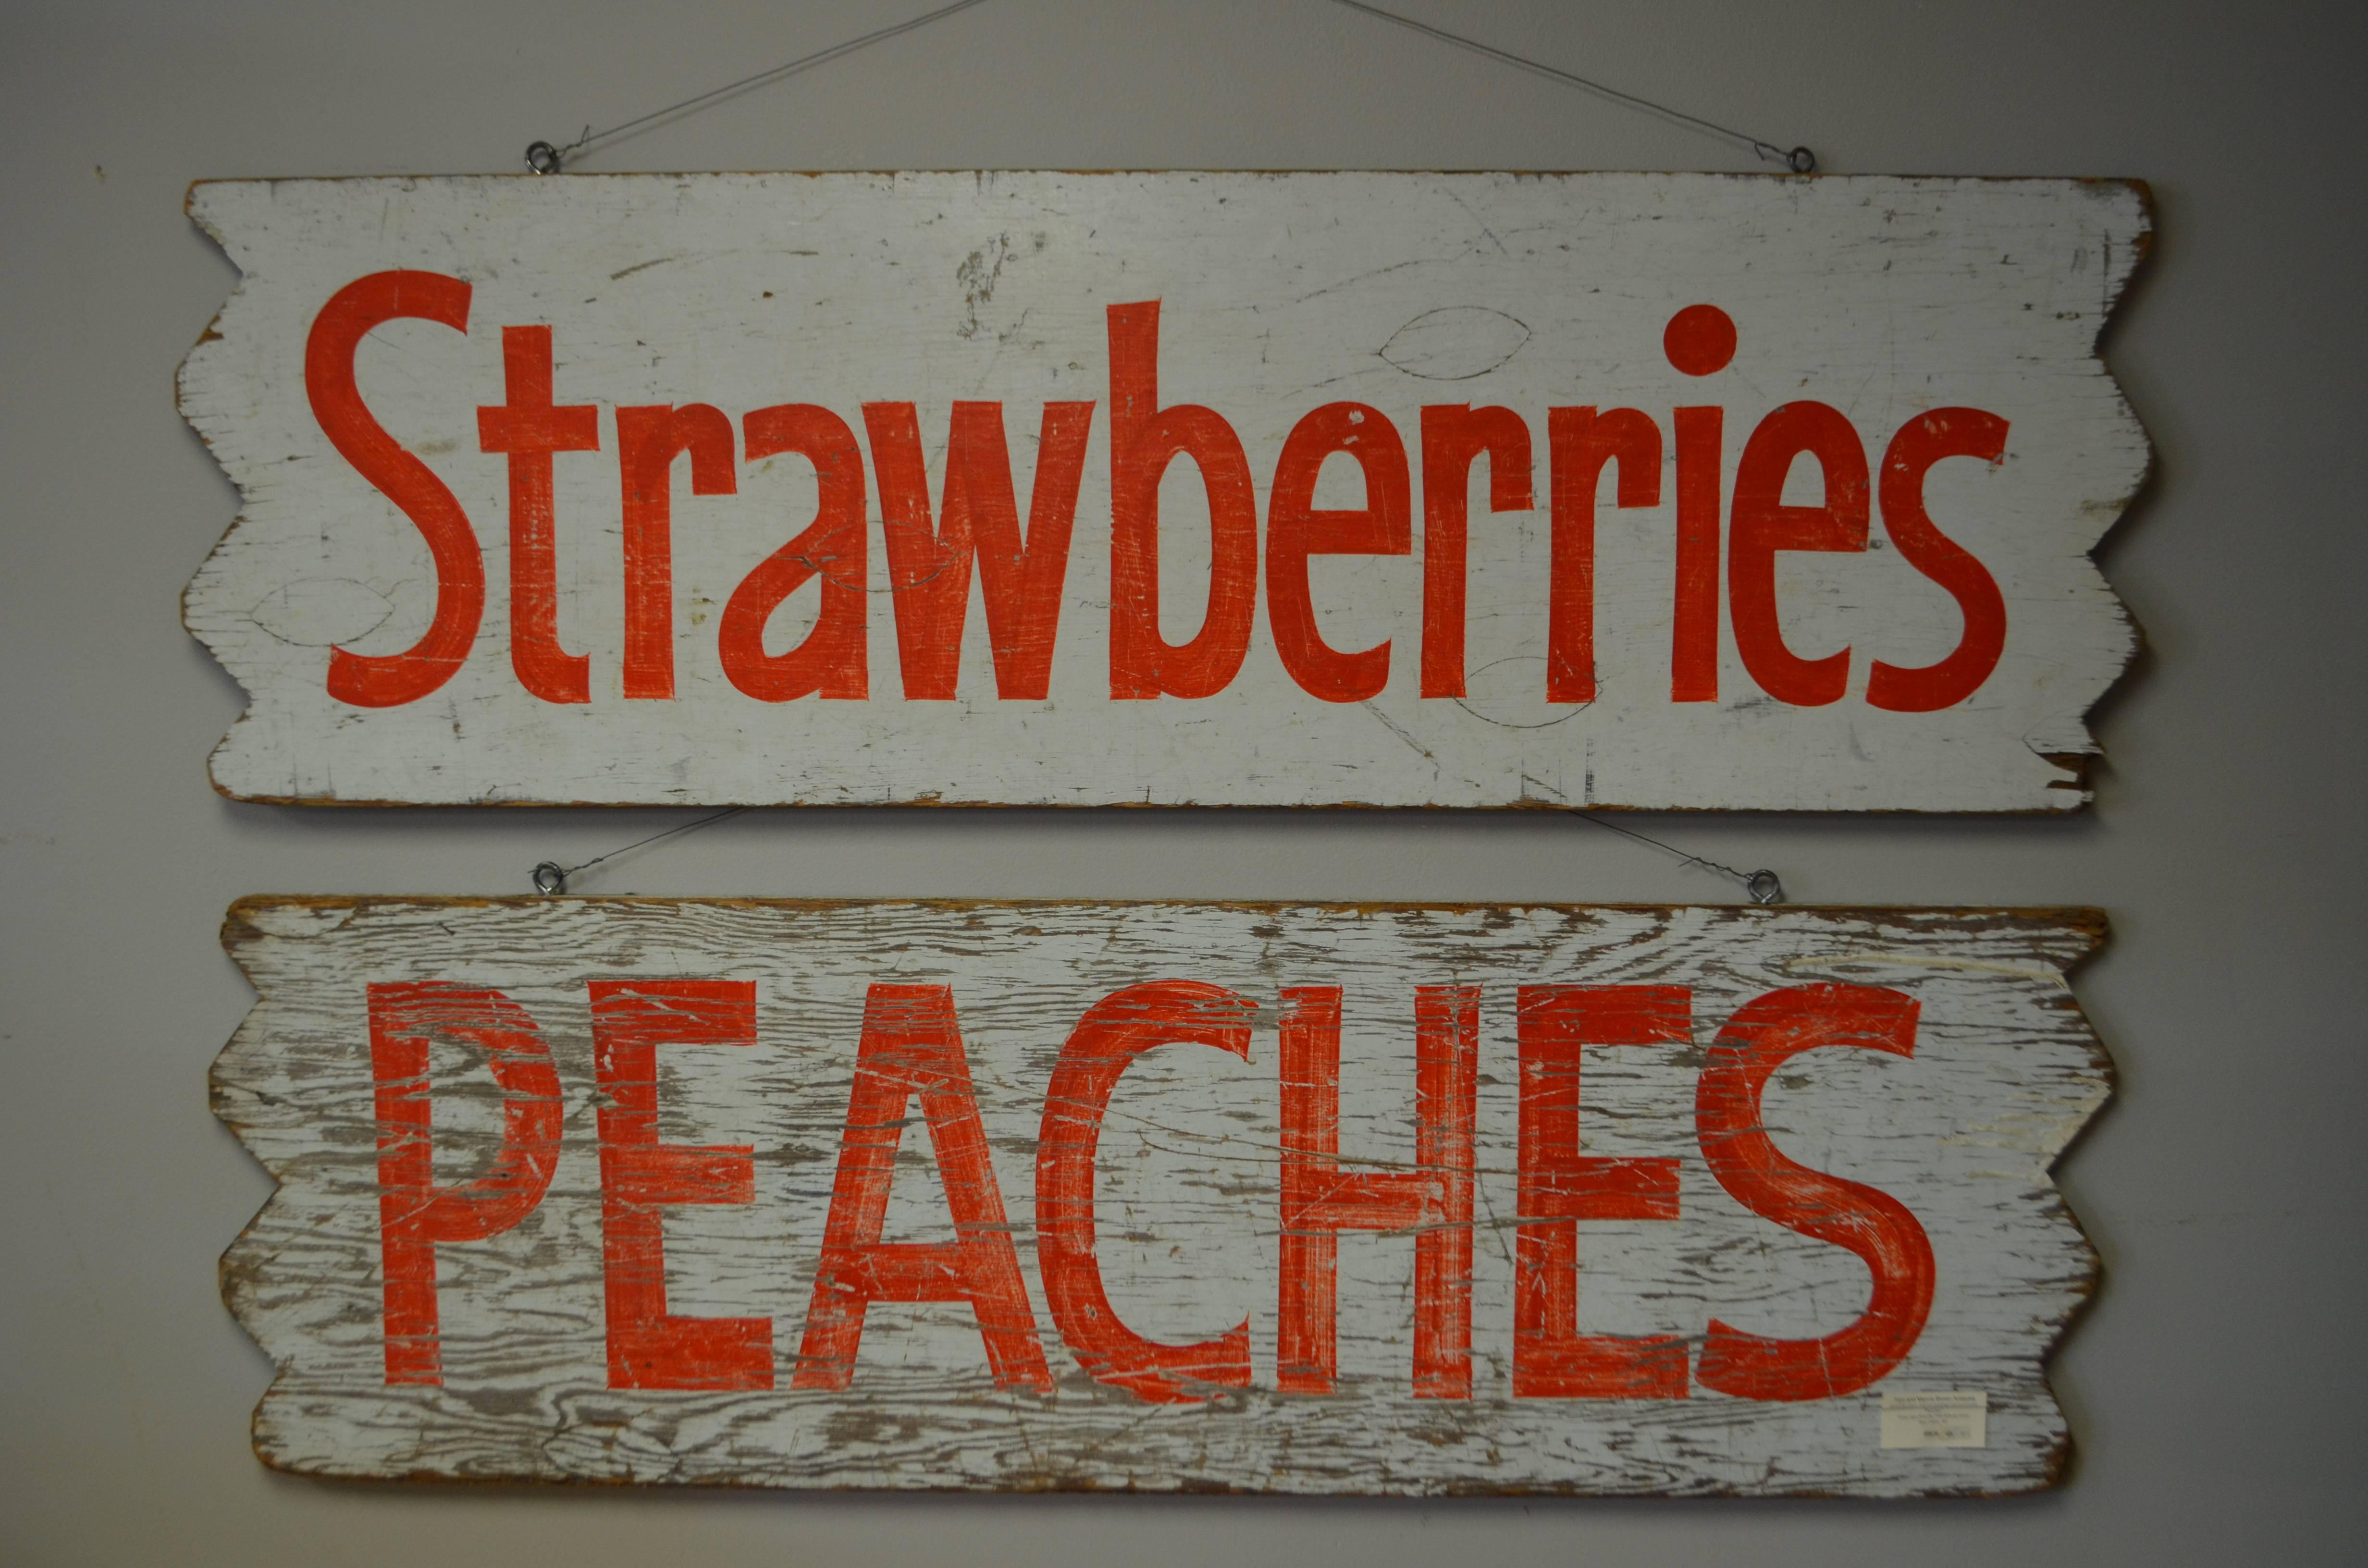 Pair of hand-lettered farm produce signs from the early 1950s. That's when Americans in great numbers first took to the road for family summer vacations. Imagine rounding the bend on a dusty country road to discover a ramshackle wooden farm stand